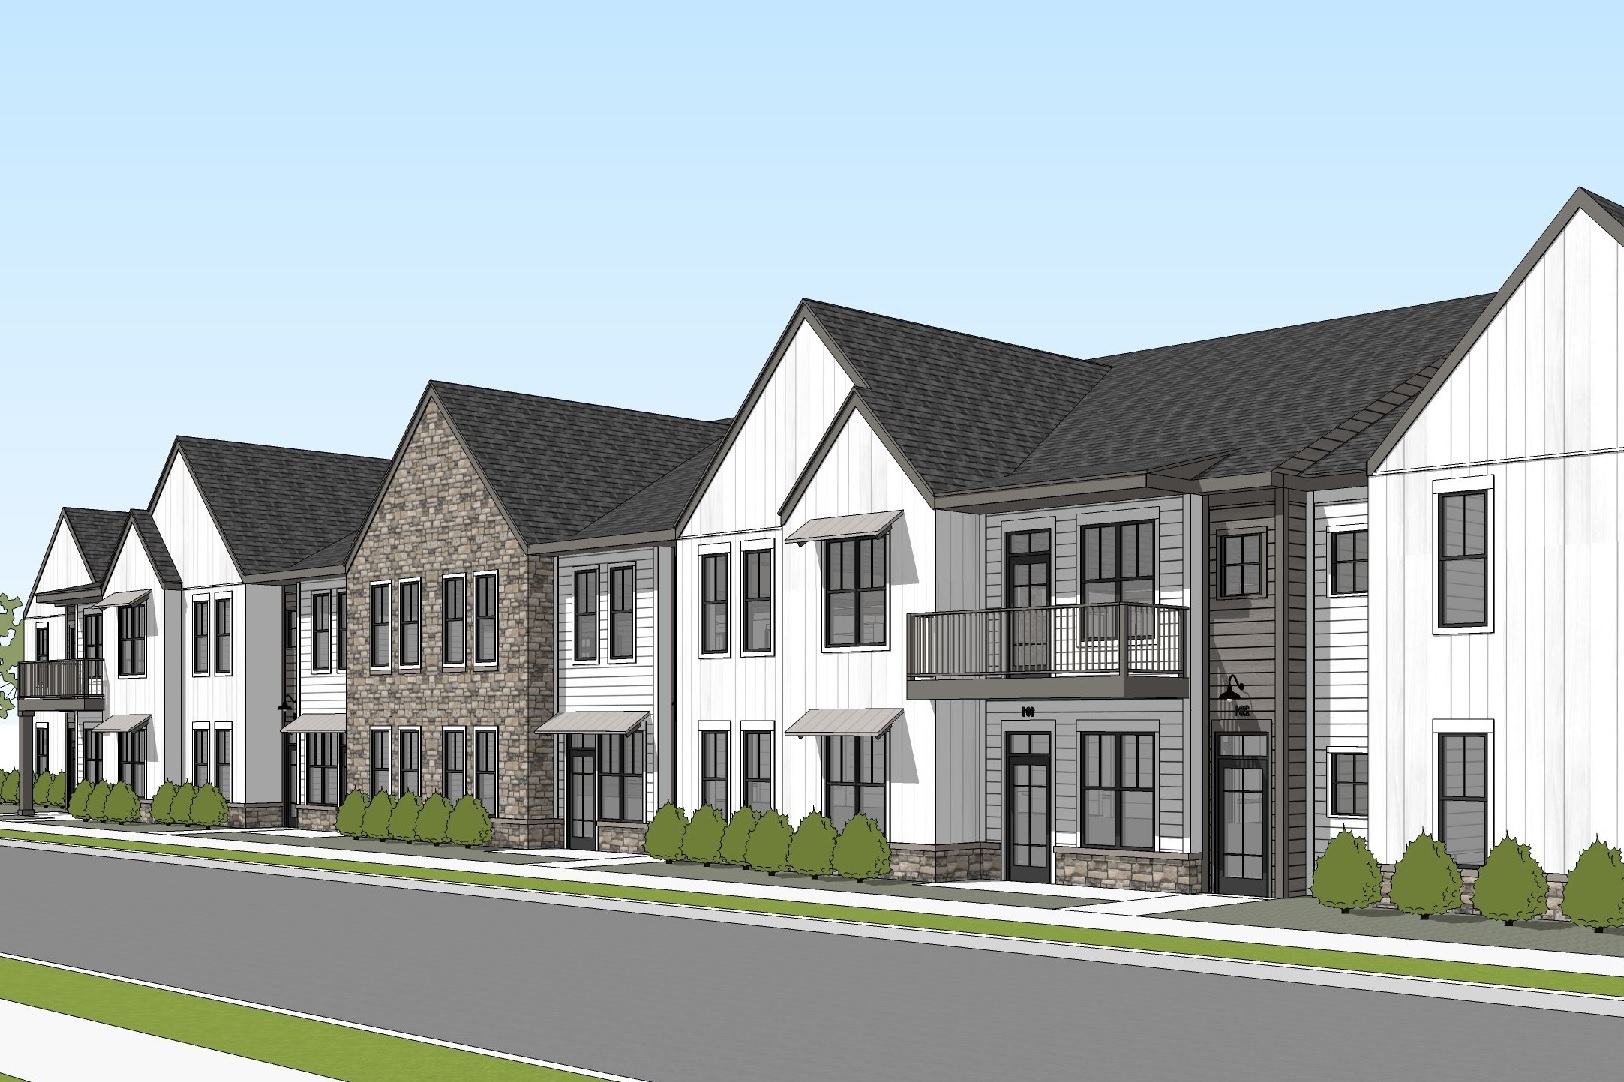 Leading Multifamily Developer Watermark Residential to Develop New 320-Unit Luxury Apartment Community in Grand Rapids